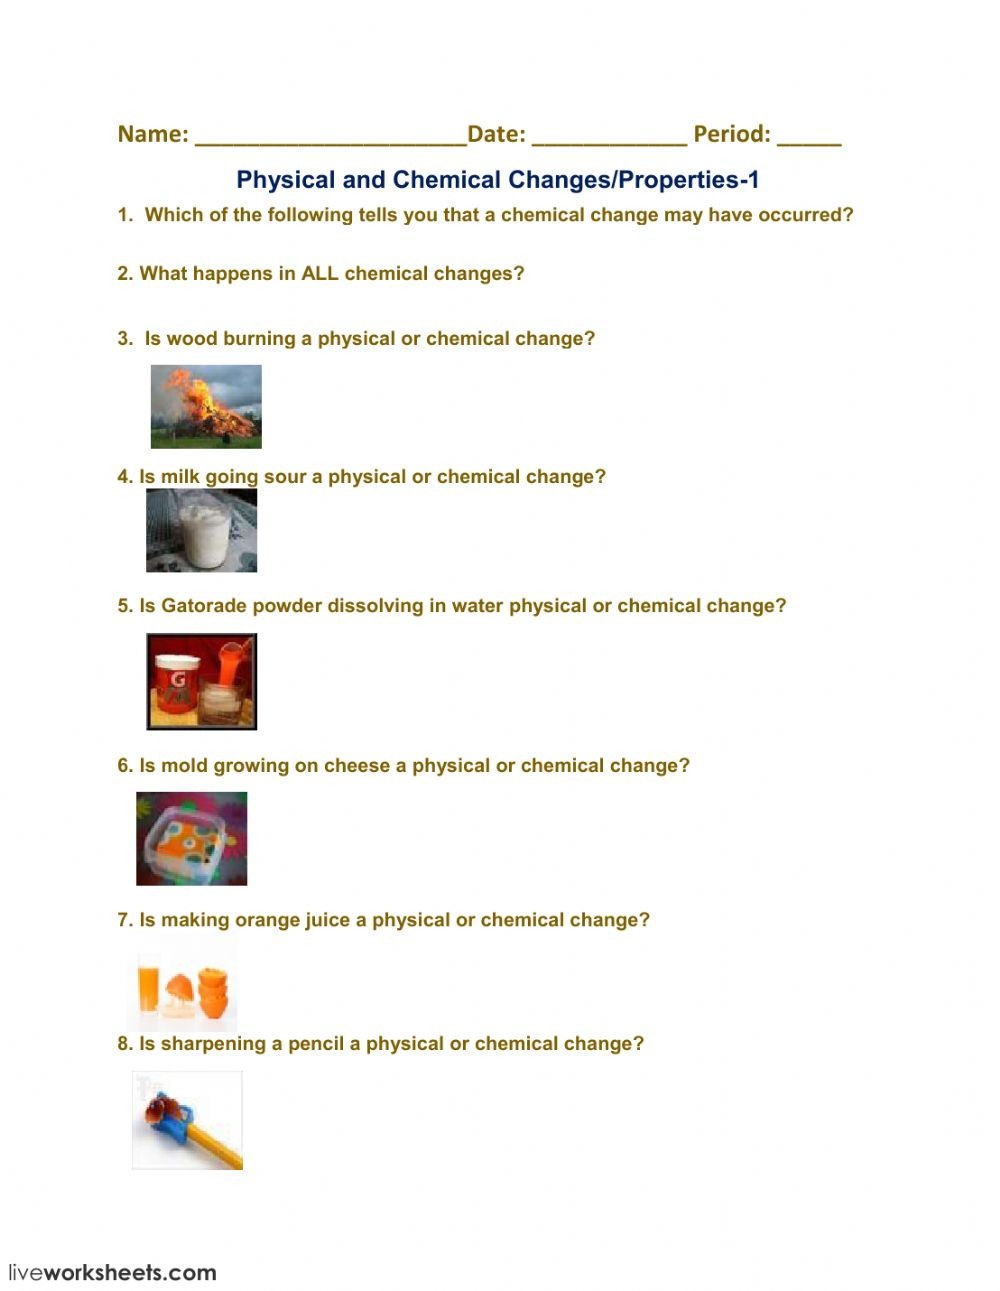 Chemical and Physical Changes Worksheet Physical and Chemical Changes Properties 1 Interactive